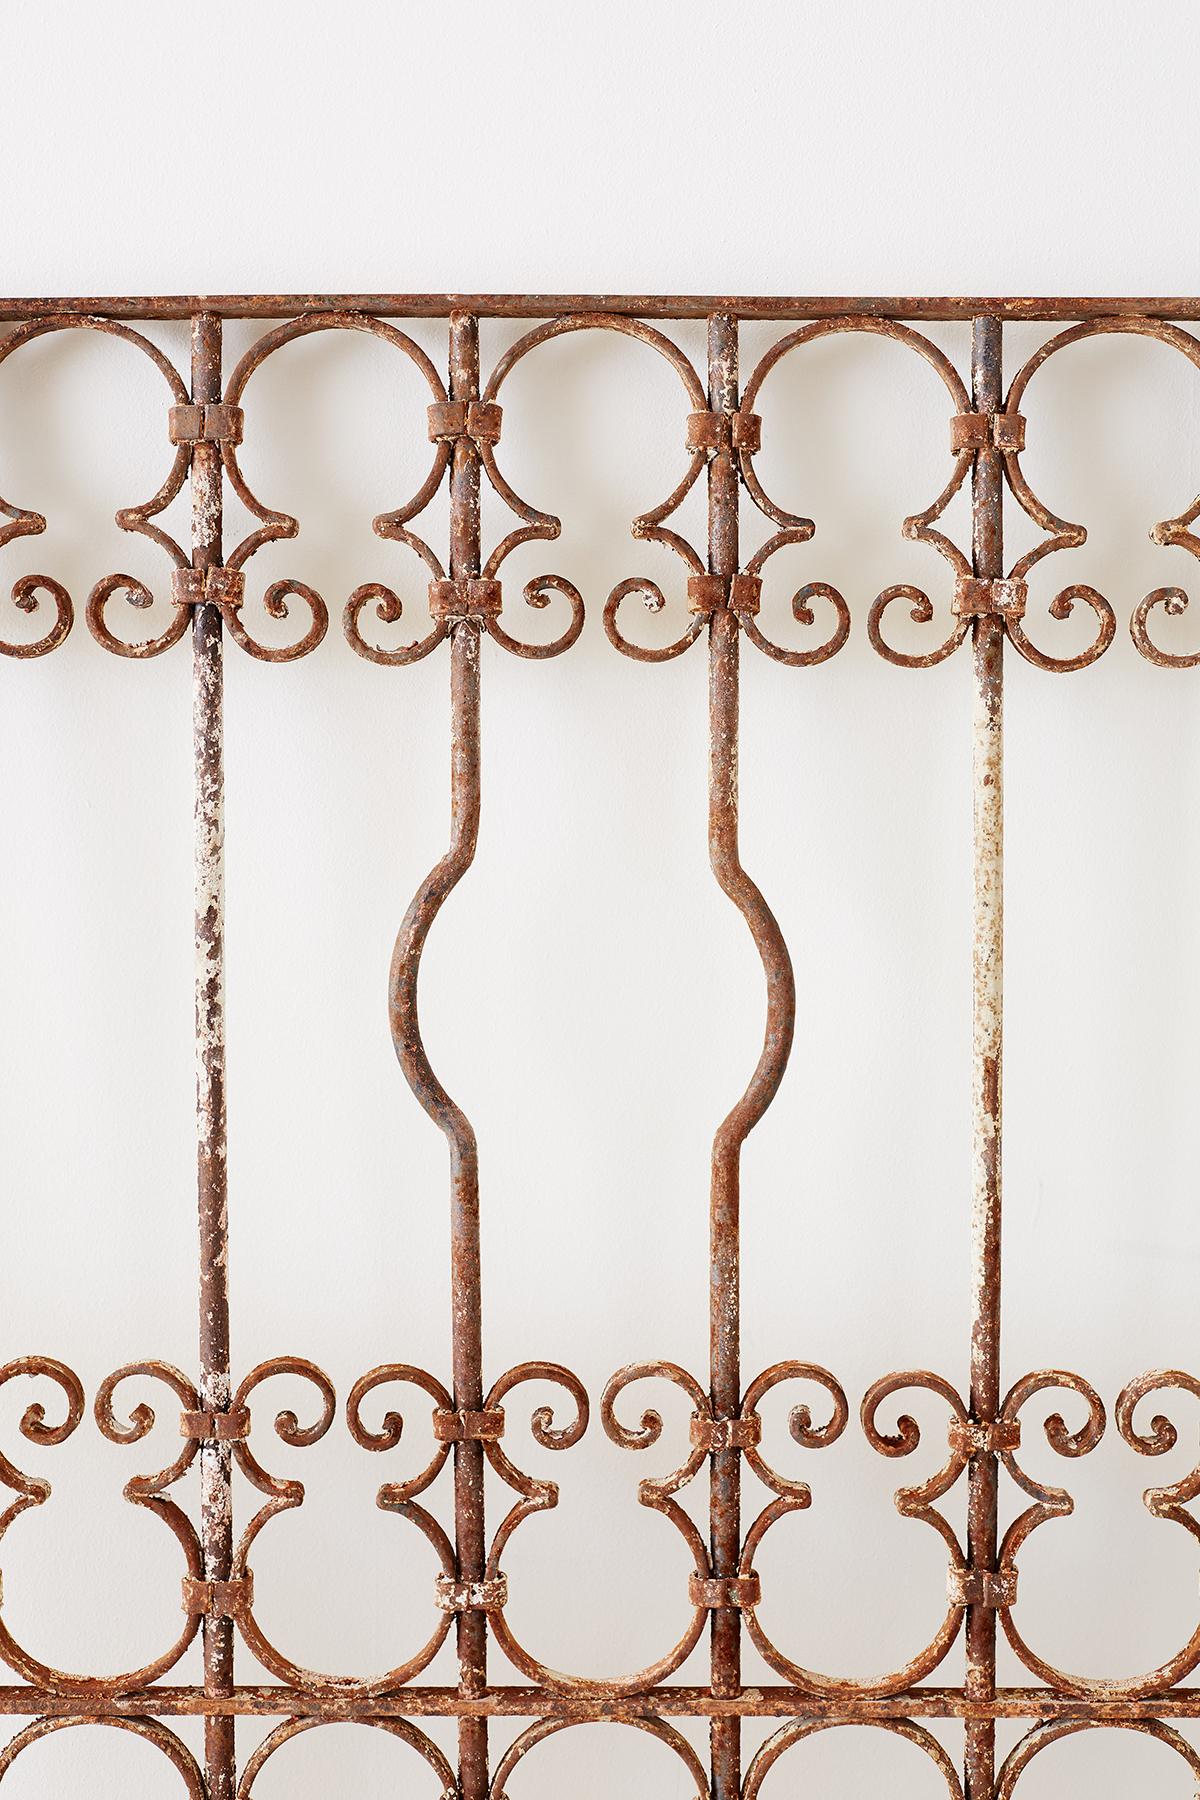 Spanish Wrought Iron Window Grill or Gate 2